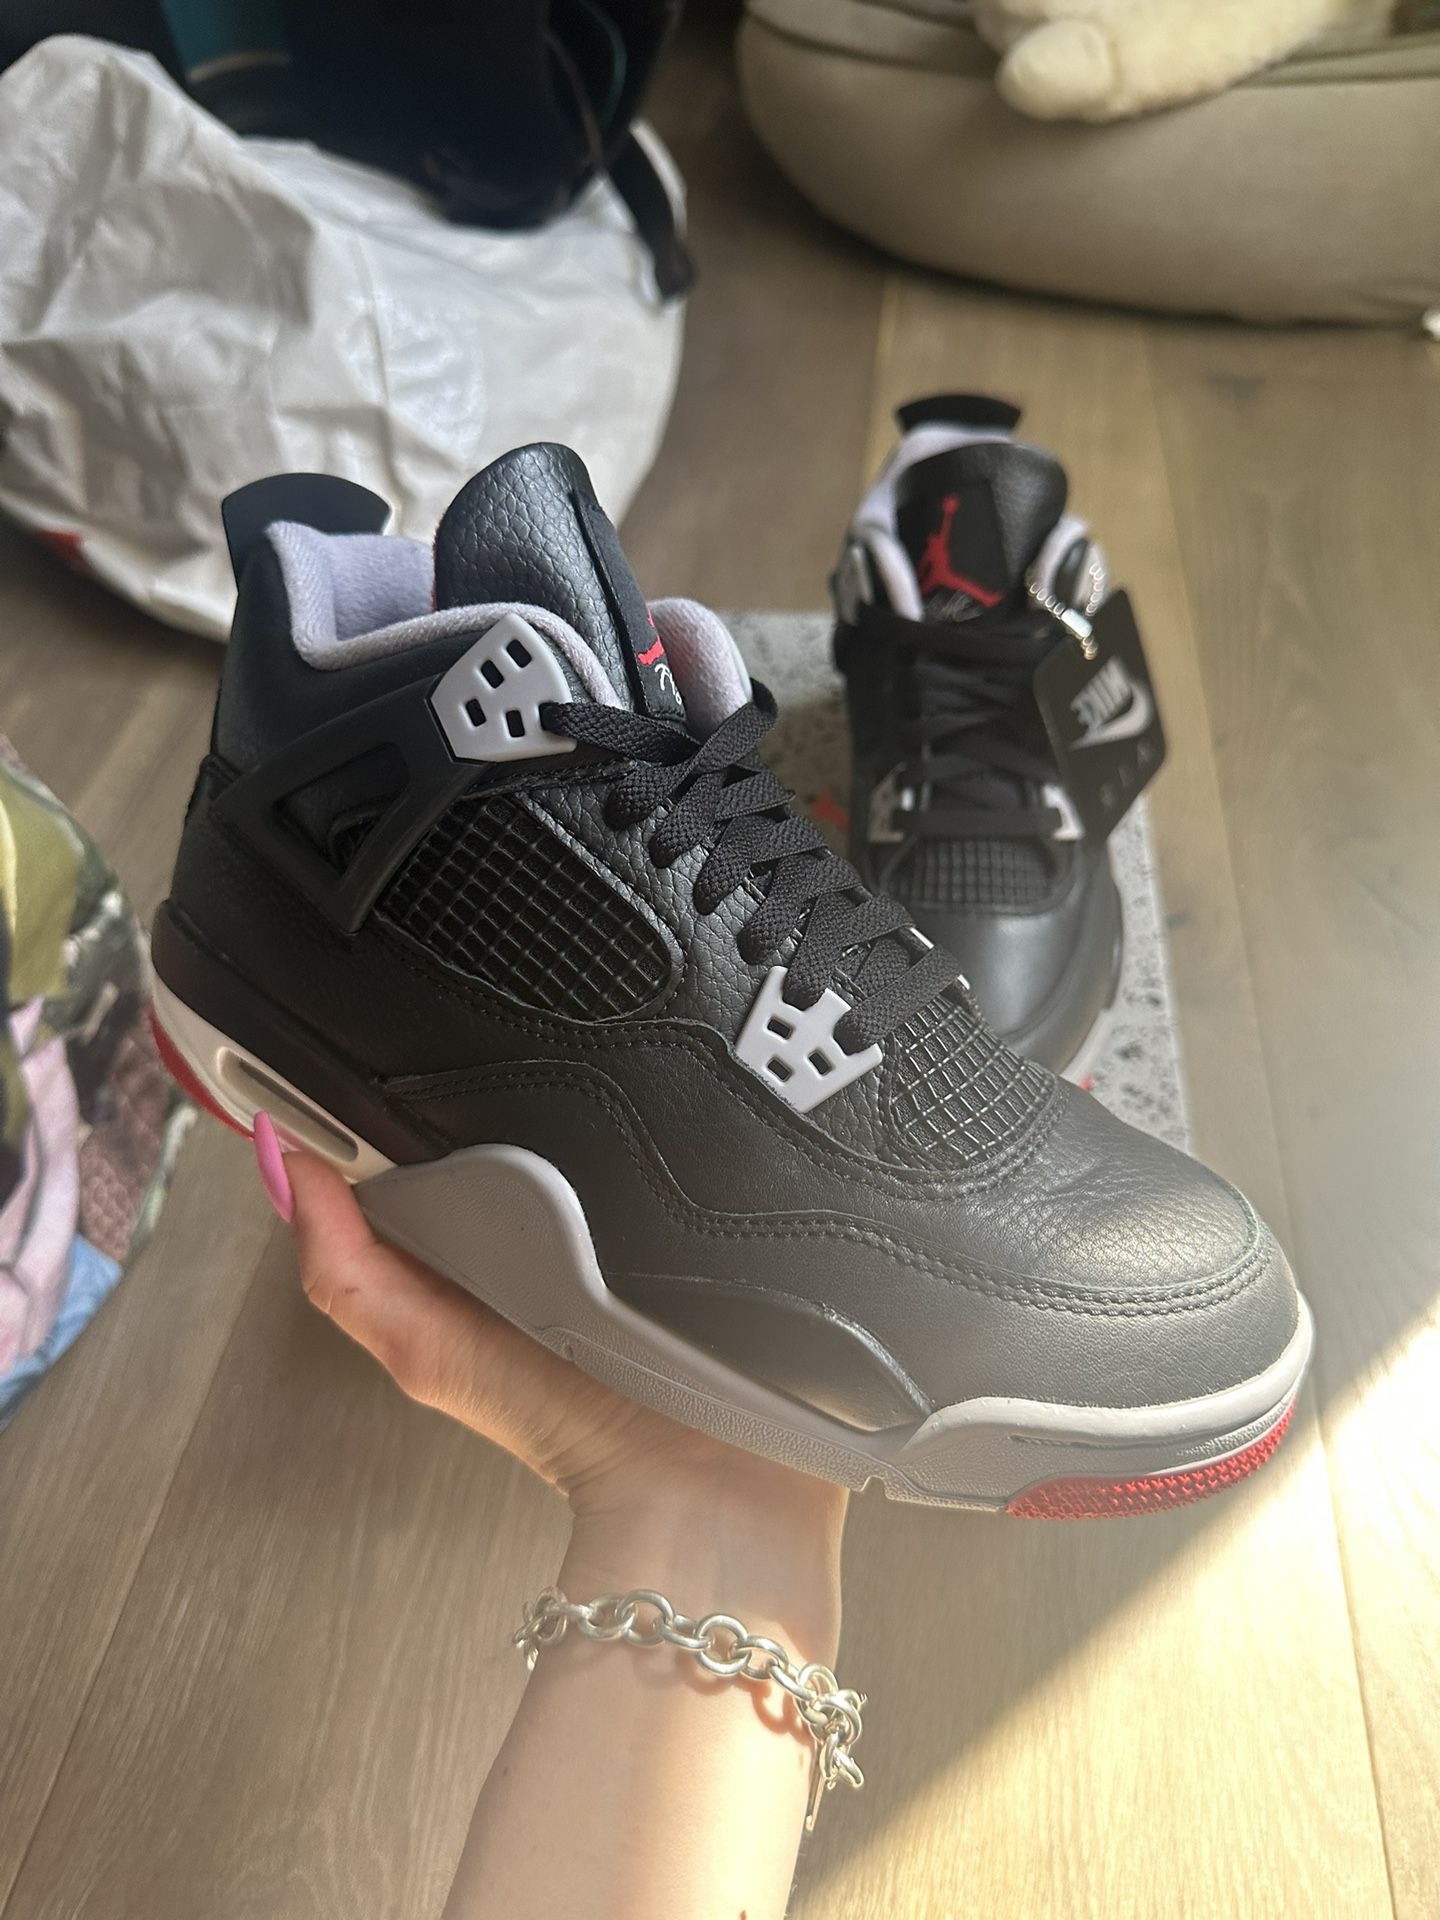 Brand new Jordan 4 Bred Reimagined size 6 youth 